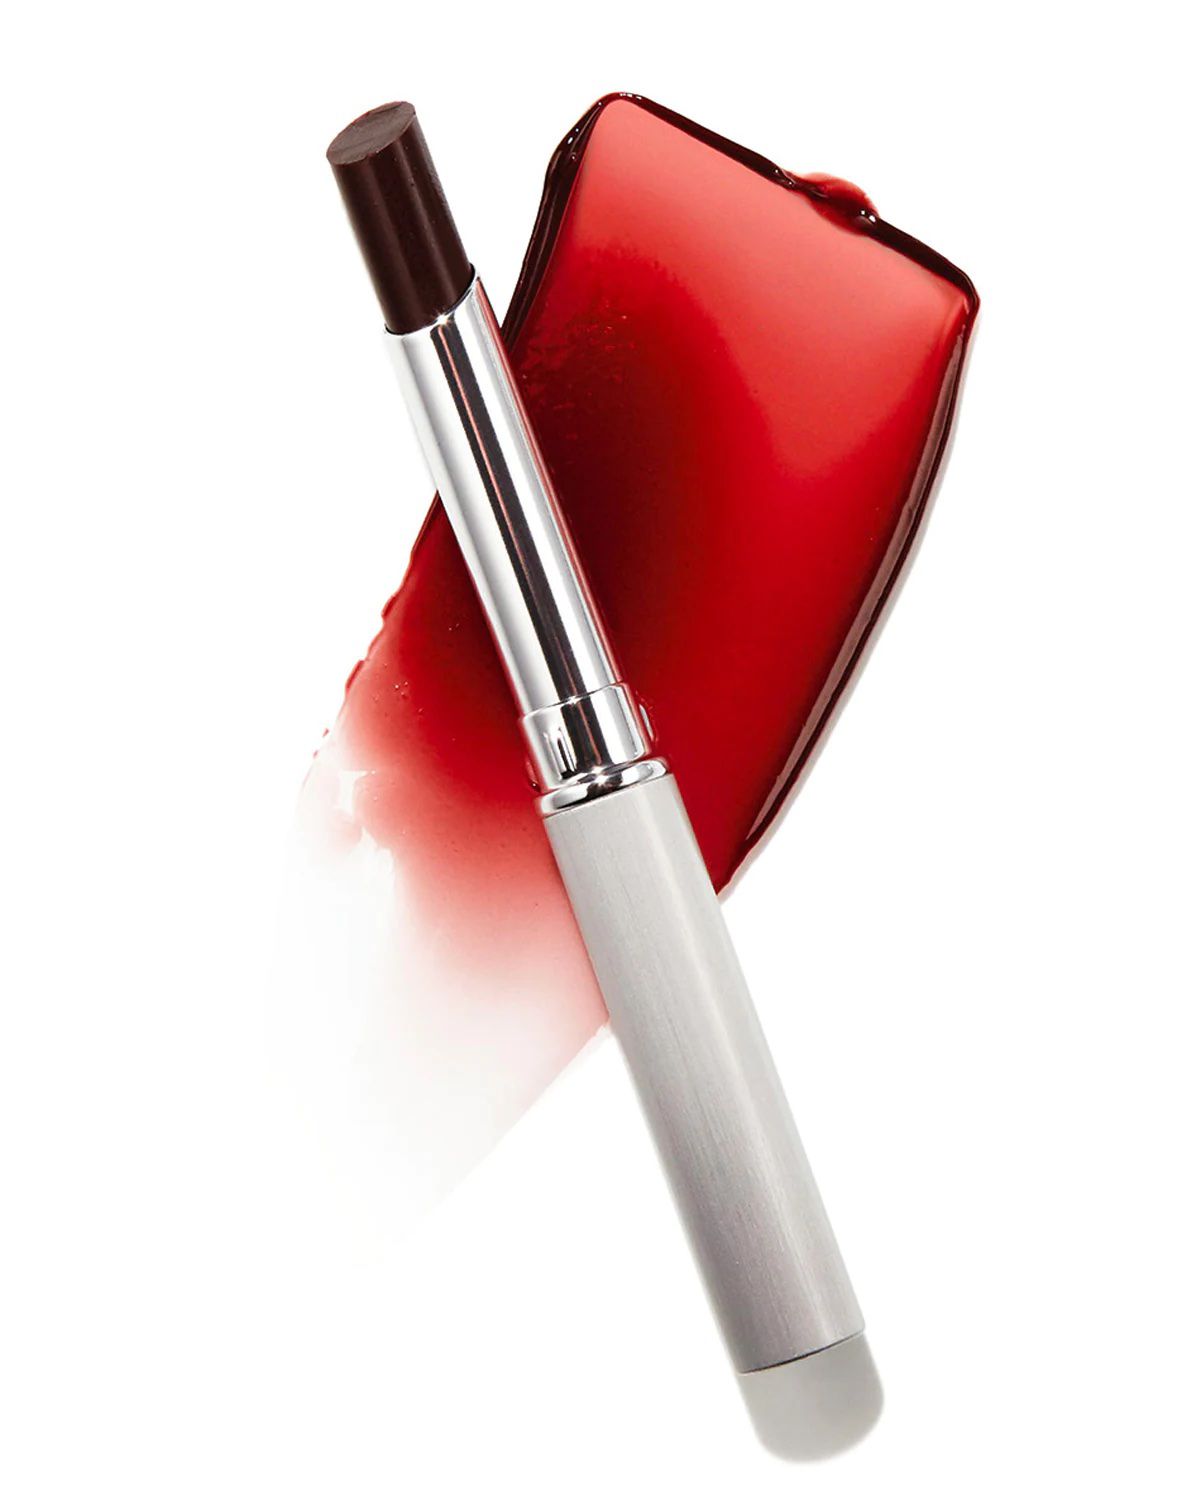 an image of a tube of Clinique Almost Lipstick in the Black Honey shade, superimposed atop a swatch of the lipstick